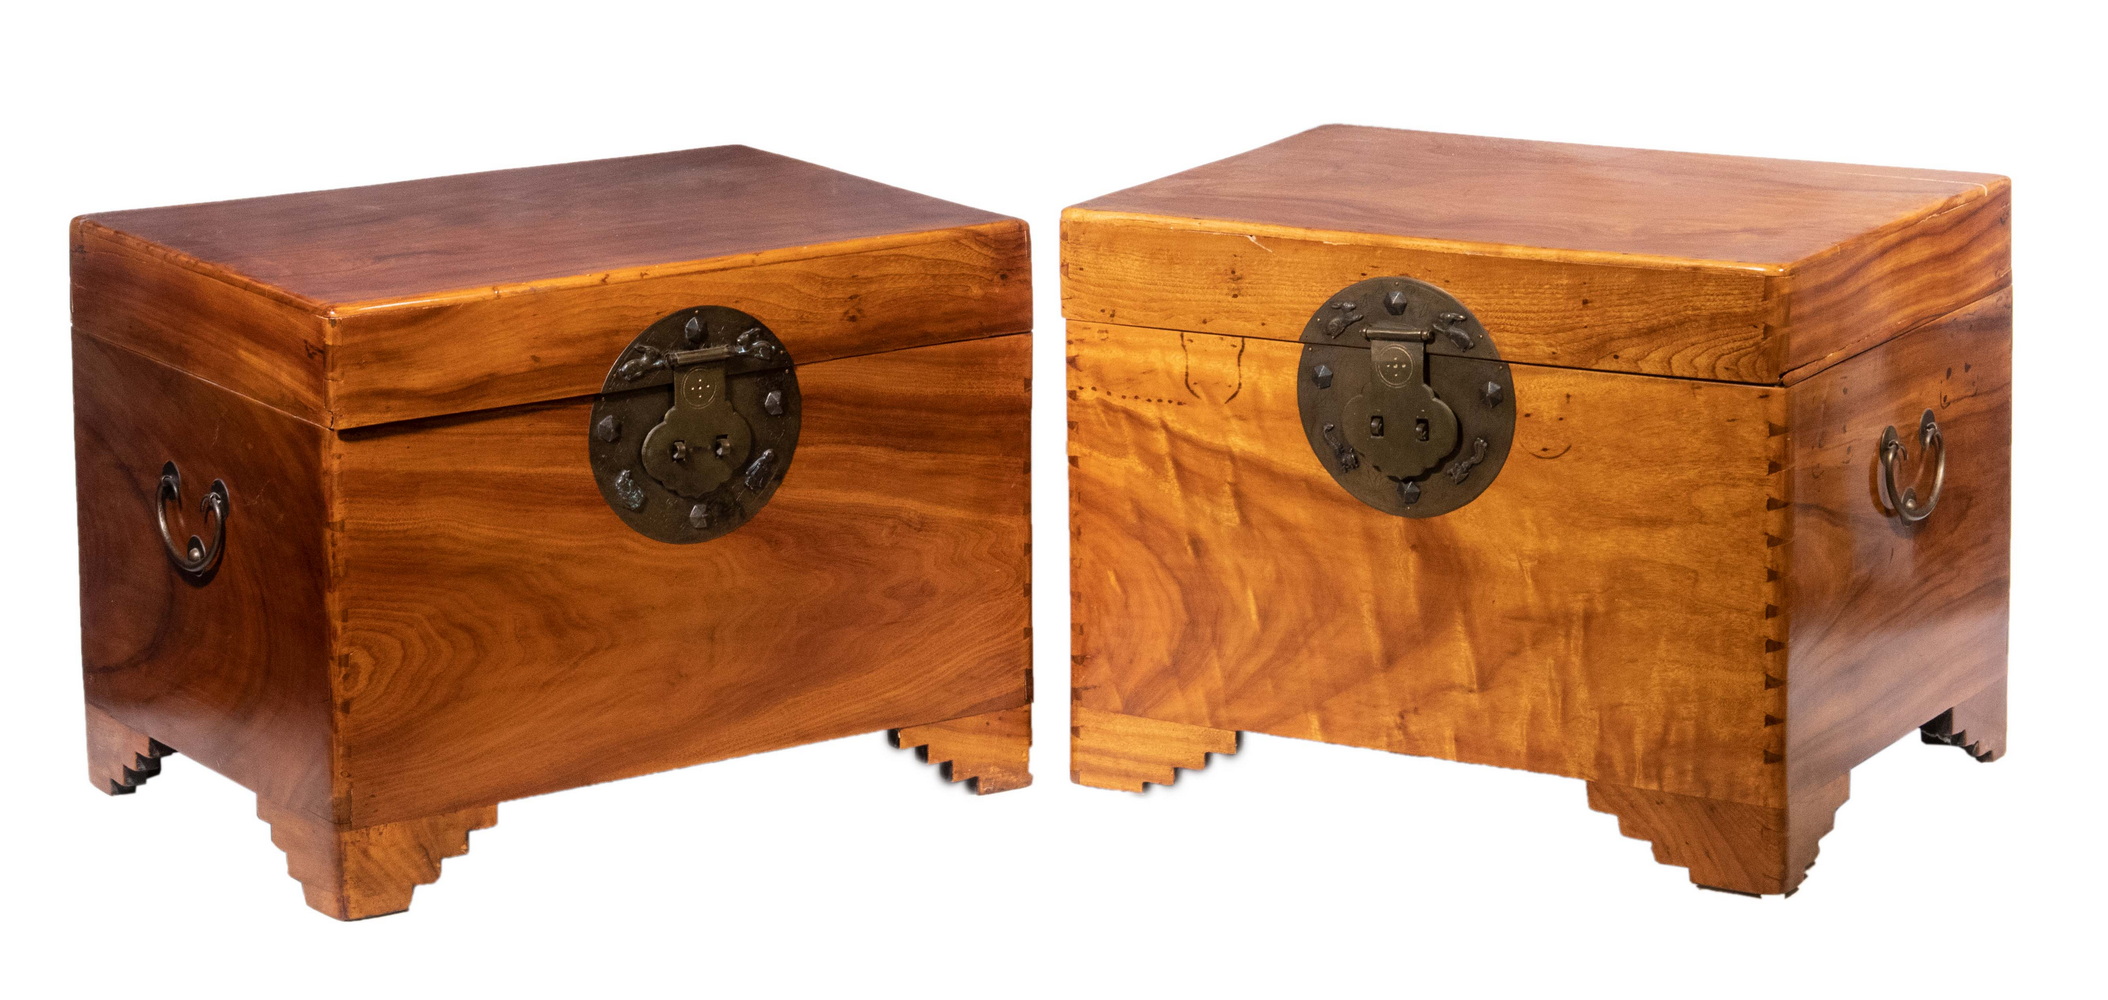 PAIR OF 19TH C. CHINESE CAMPHORWOOD